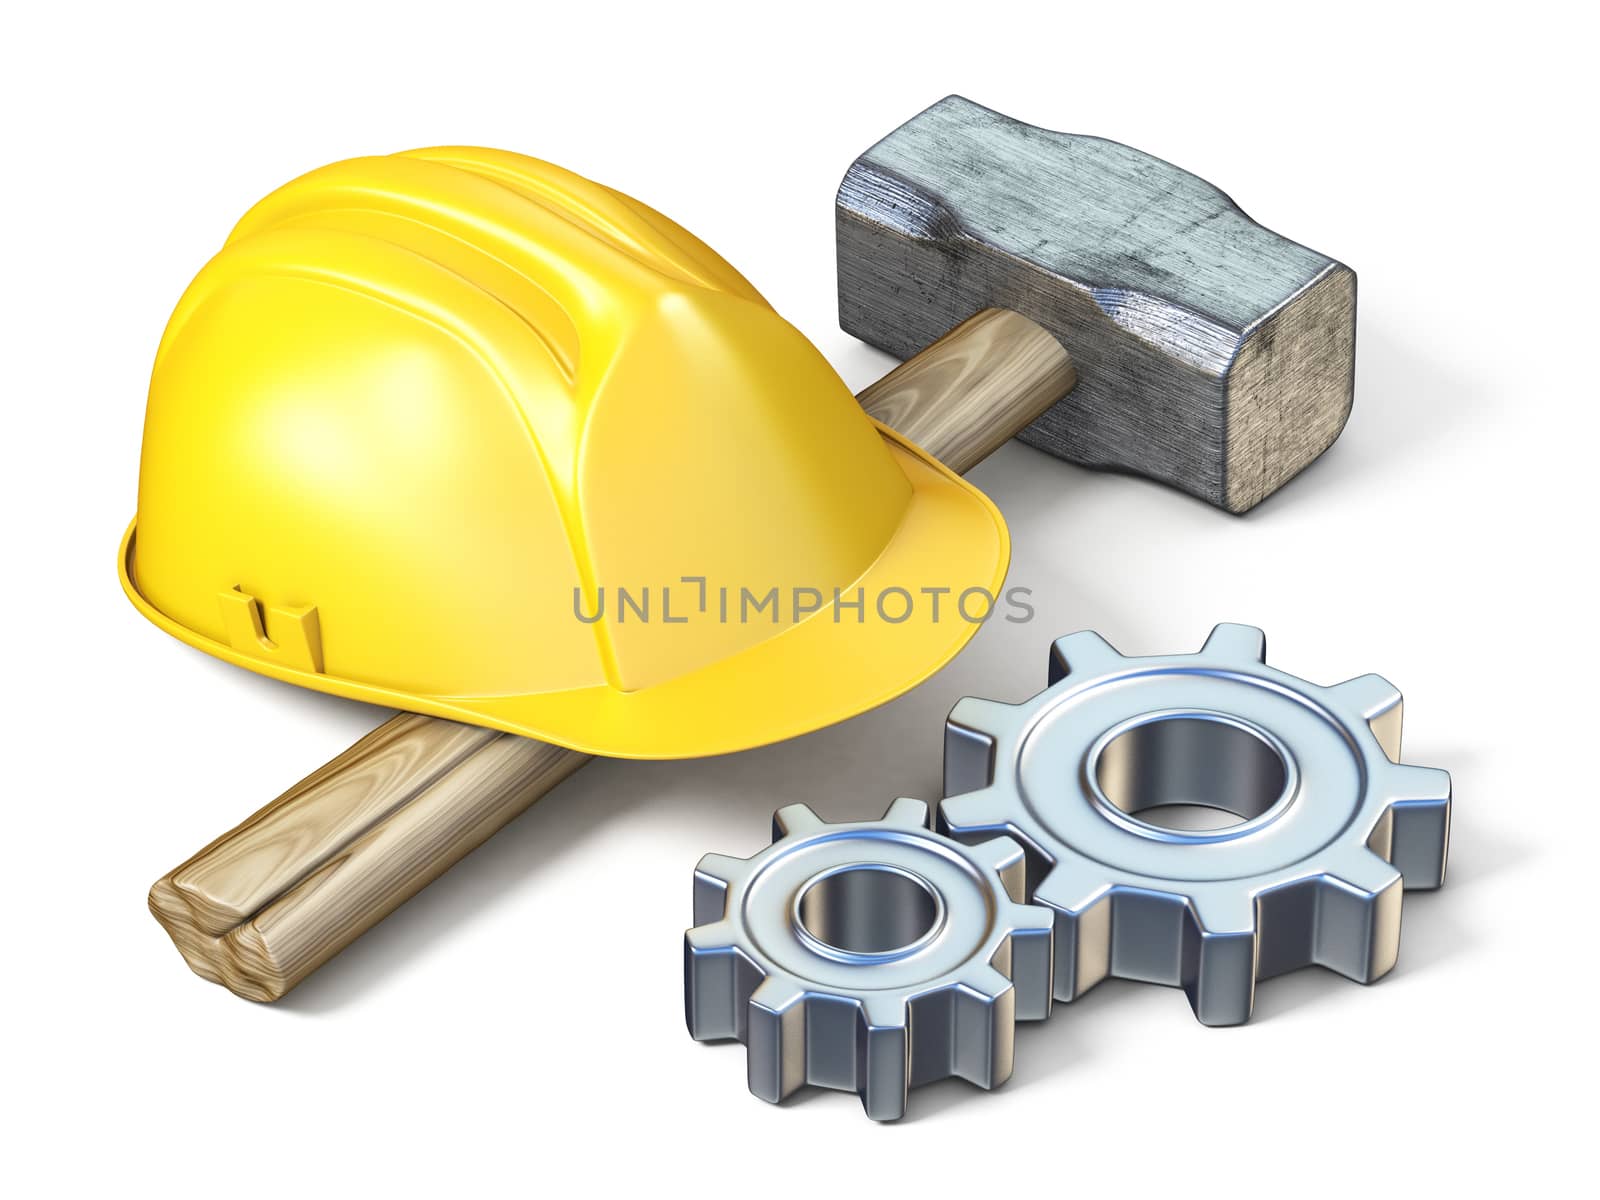 Yellow safety helmet, sledge hammer and metal gears 3D rendering illustration isolated on white background